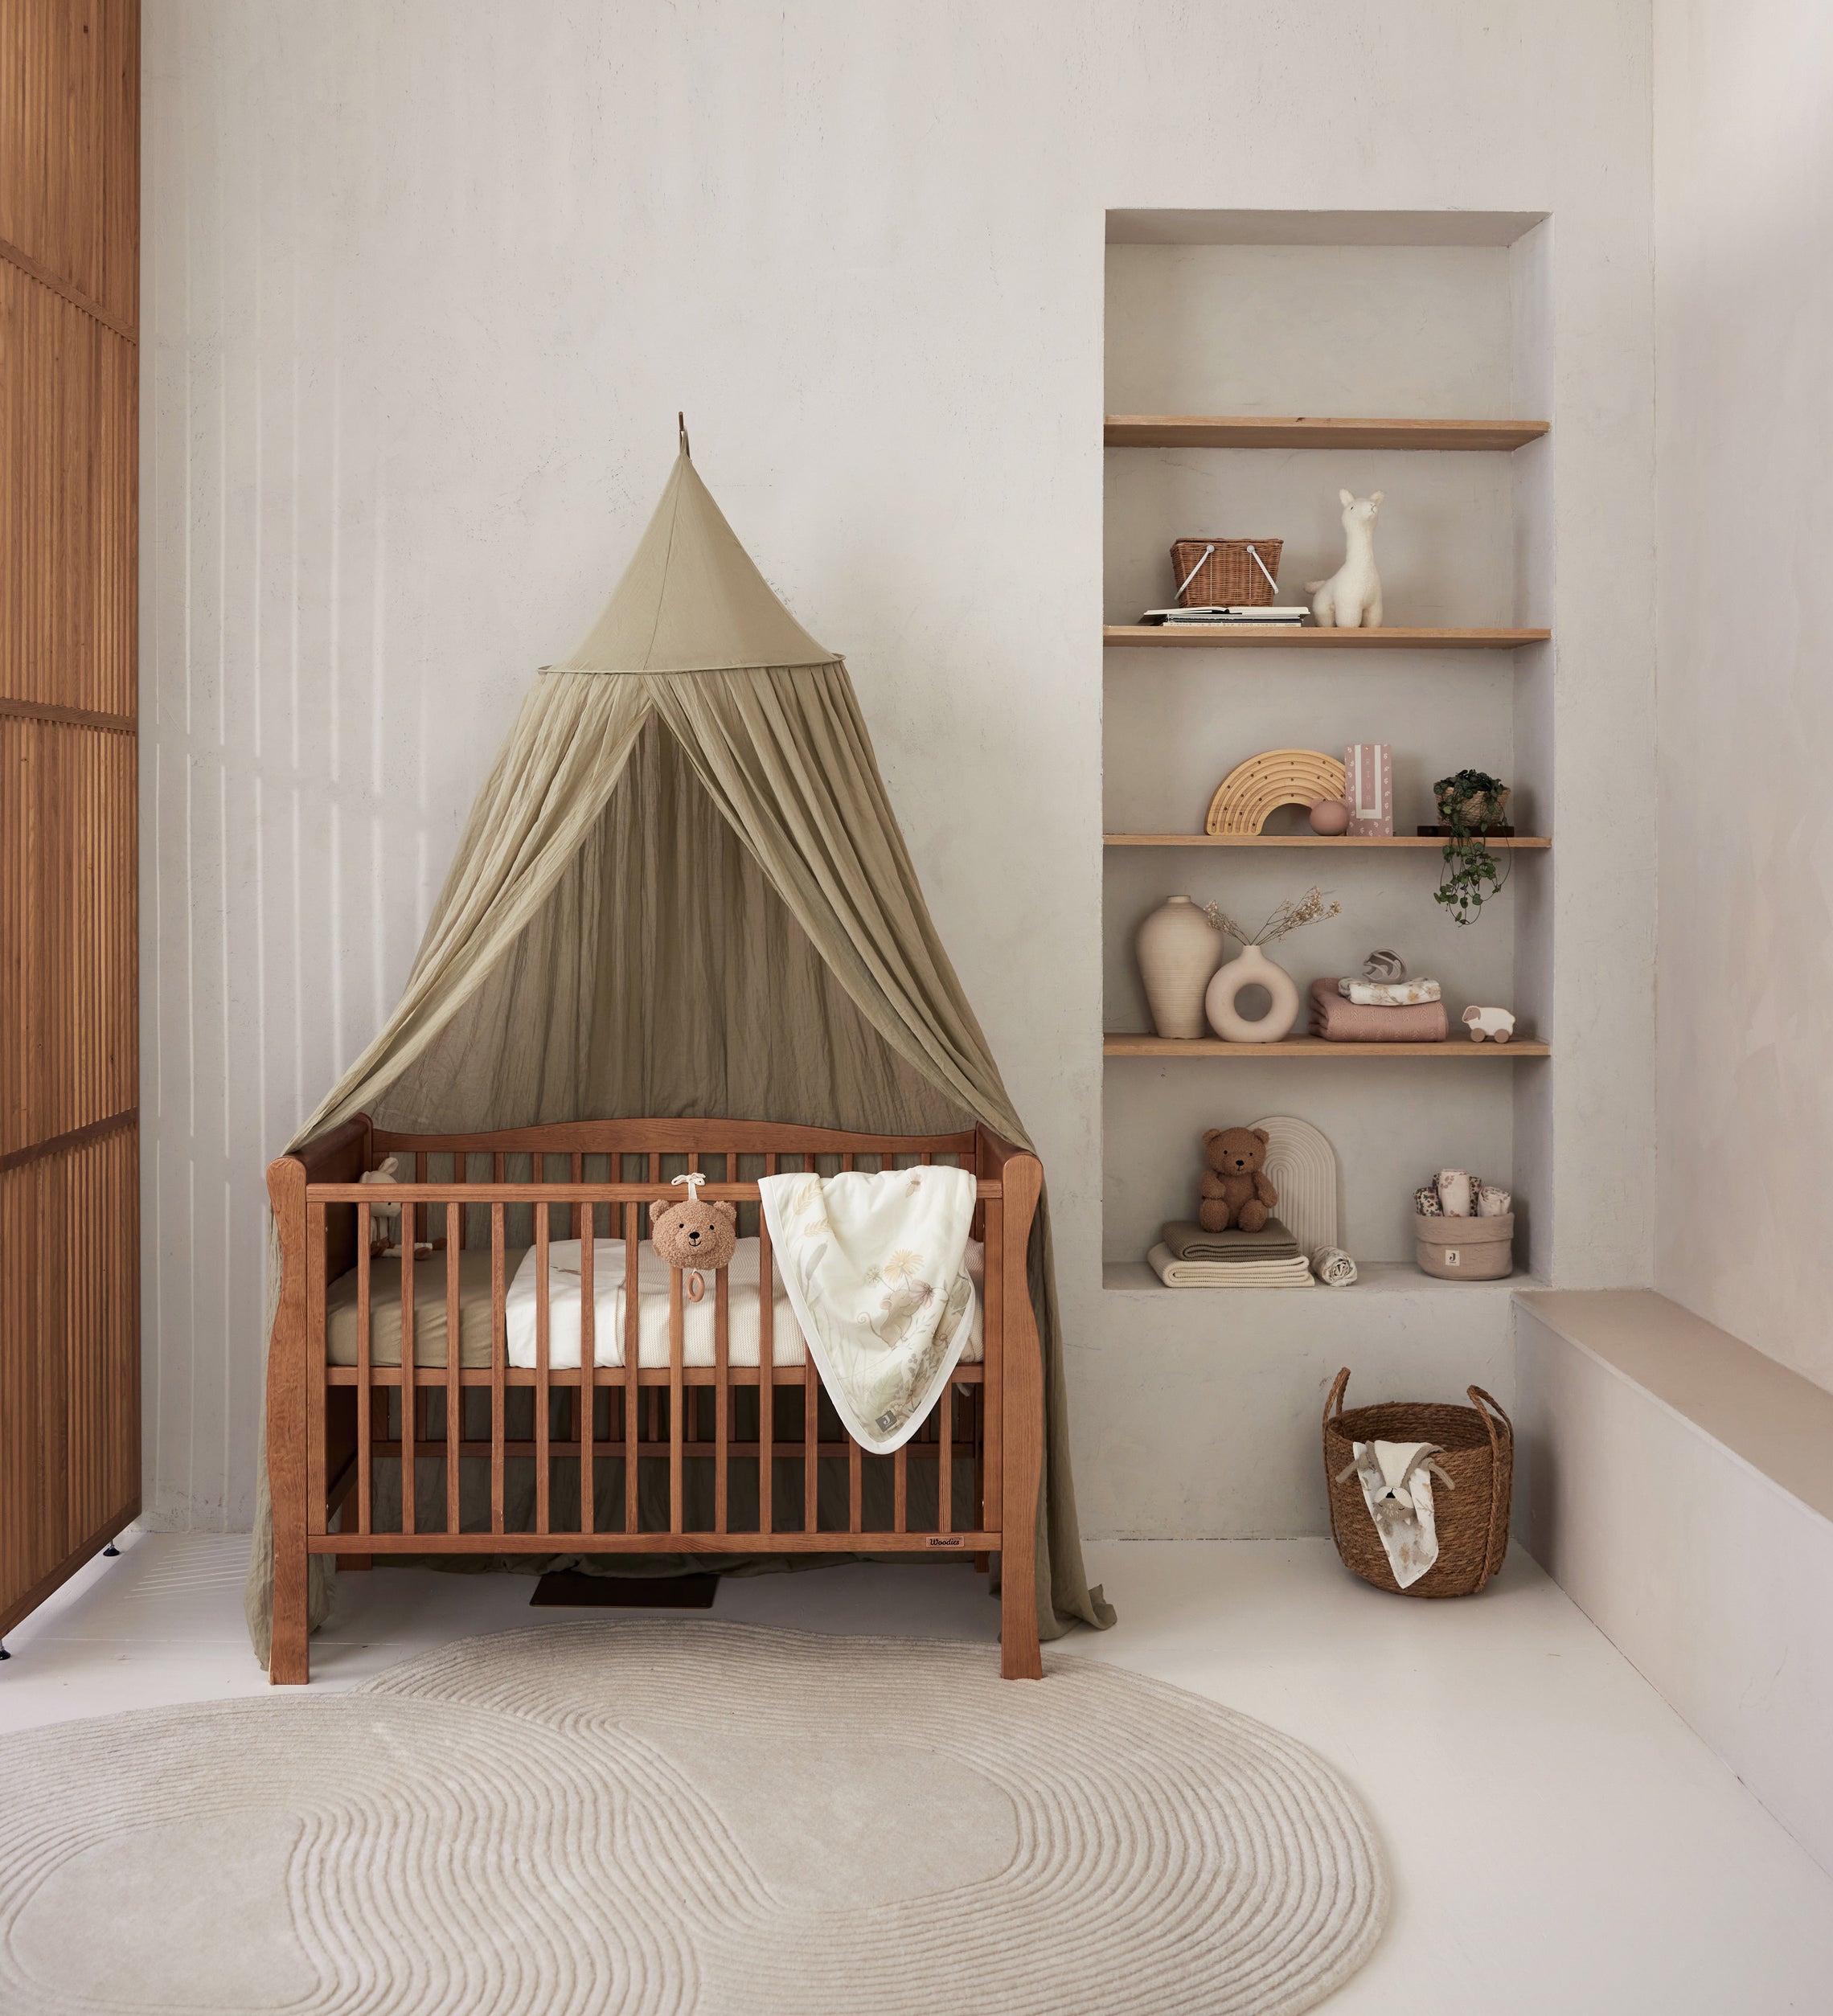 Jollein Canopy olive green in a nursery room